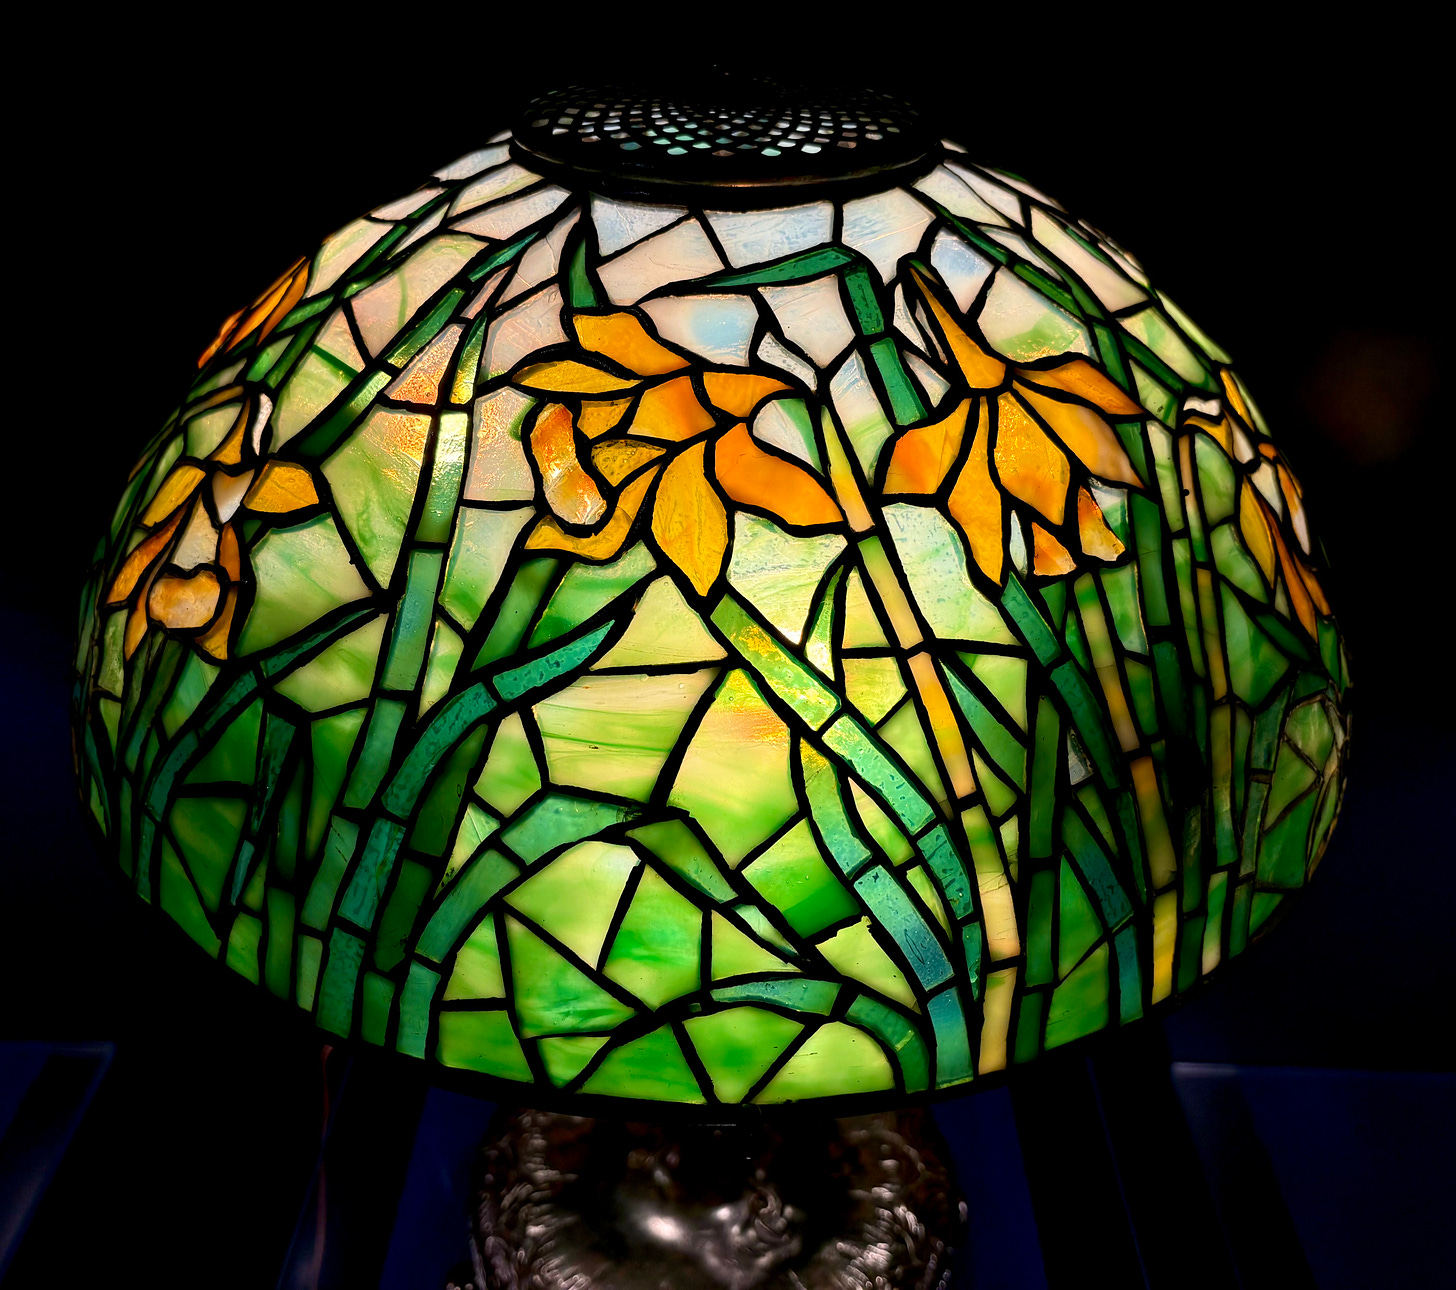 A closer view of the daffodil lamp, the yellow daffodils against pale glass bluer towards the top like sky.